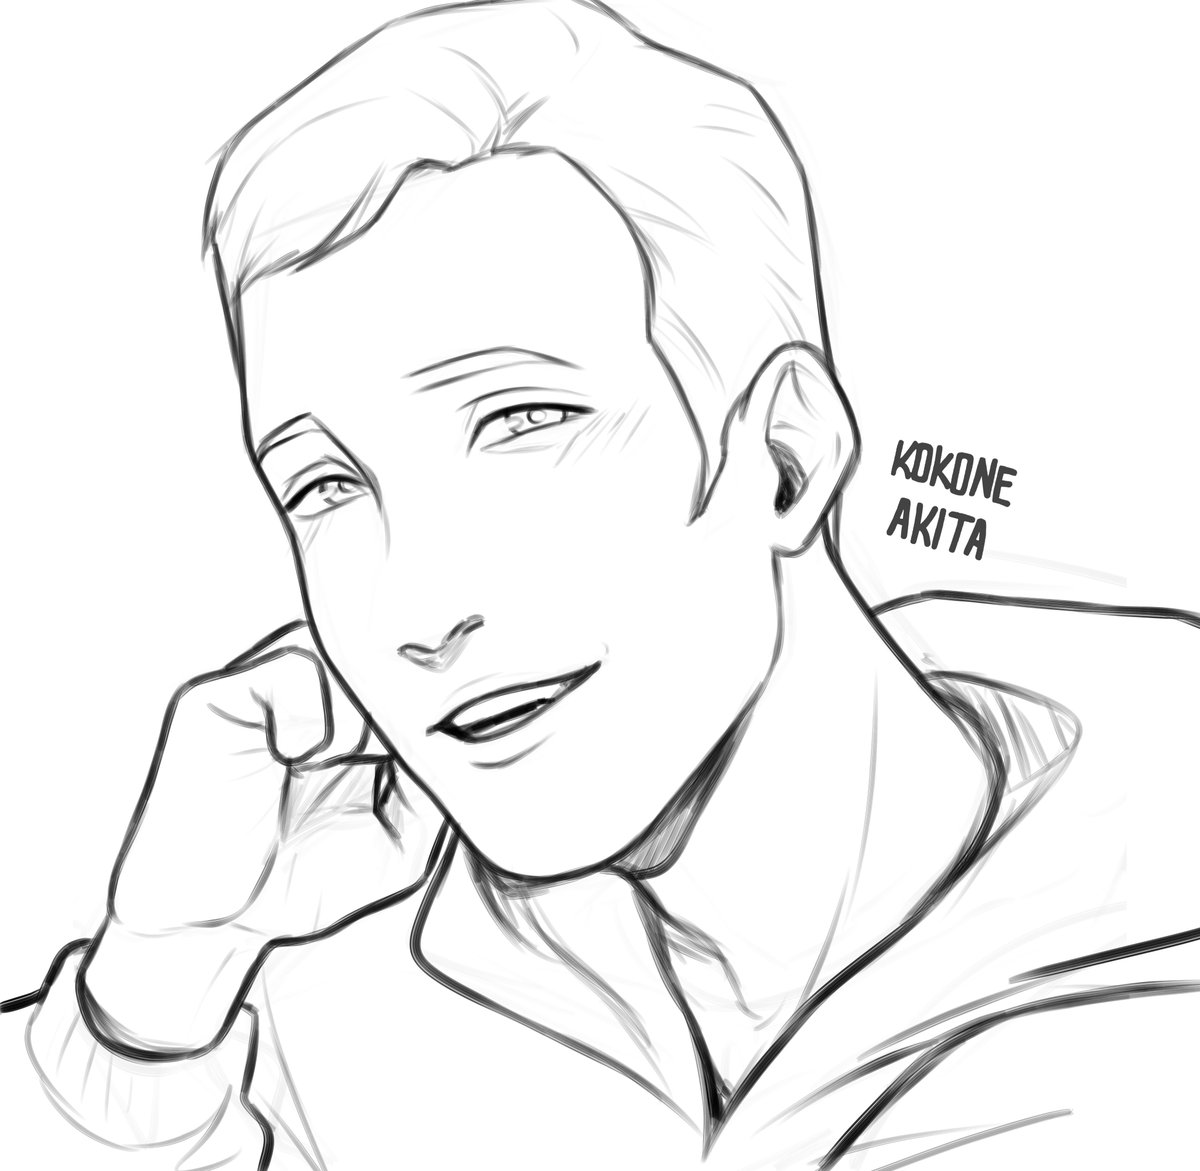 I was trying to make a short comic but my art style is very inconsistent so I'm not sure if I'll be able to finish it
This Simon looks very cute though 🥺
#DetroitBecomeHuman 